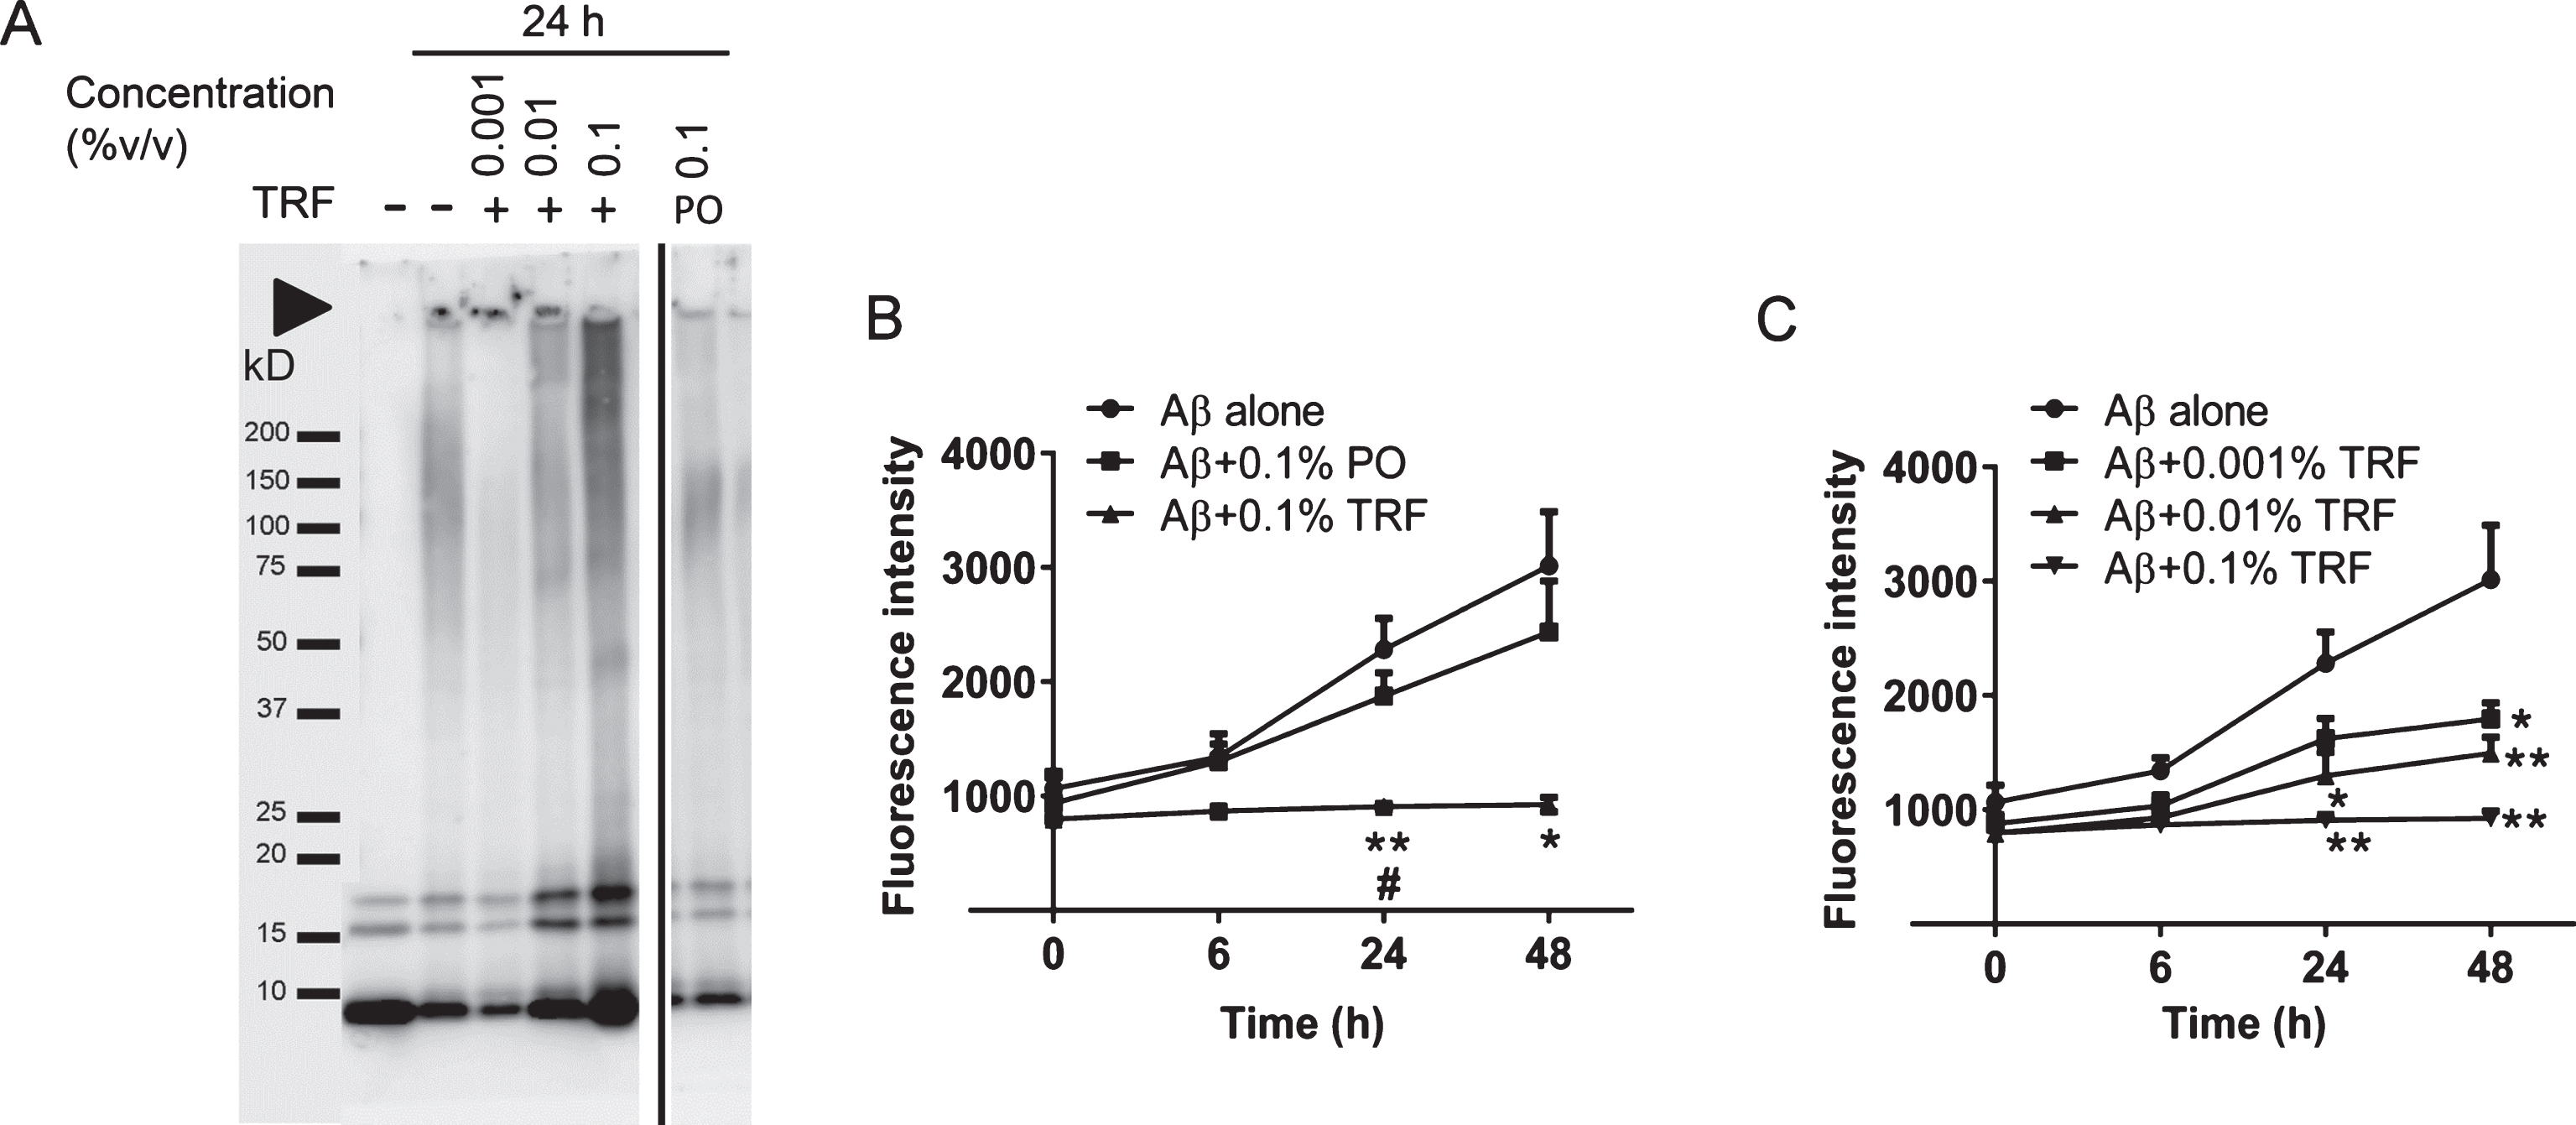 In vitro treatment with the tocotrienol-rich fraction (TRF) of palm oil prevents Aβ42 aggregation. A) Aβ42 samples treated with TRF, palm oil stripped of vitamin E (PO), or vehicle (5% ethanol in phosphate-buffered saline) for 24 h at 37°C were subjected to sodium dodecyl sulfate-polyacrylamide gel electrophoresis. TRF-treated Aβ42 at final concentration of 0.1% v/v displayed a marked smear and intense bands compared to non-treated and PO-treated Aβ42. Amyloid-β42 incubated with 0.001%, 0.01%, or 0.1% v/v of TRF showed increasing in the density of smear and bands at concentration-dependent manner. Arrowhead indicates the top of the gel (A). B) Thioflavin T fluorescence intensity measured after 0-, 6-, 24-, and 48-h incubation of Aβ42 with vehicle (Aβ42 alone), PO, or TRF. Fluorescence intensity increased with time, indicating progressive Aβ42 fibril formation. This process was significantly slowed by TRF and PO. C) The inhibitory effect of TRF on fibril formation was concentration dependent. Data presented as mean±S.E.M. Significance (Bonferroni post hoc test after analysis of variance): *p < 0.05, **p < 0.01 versus Aβ alone; #p < 0.01 versus Aβ + 0.1% PO.